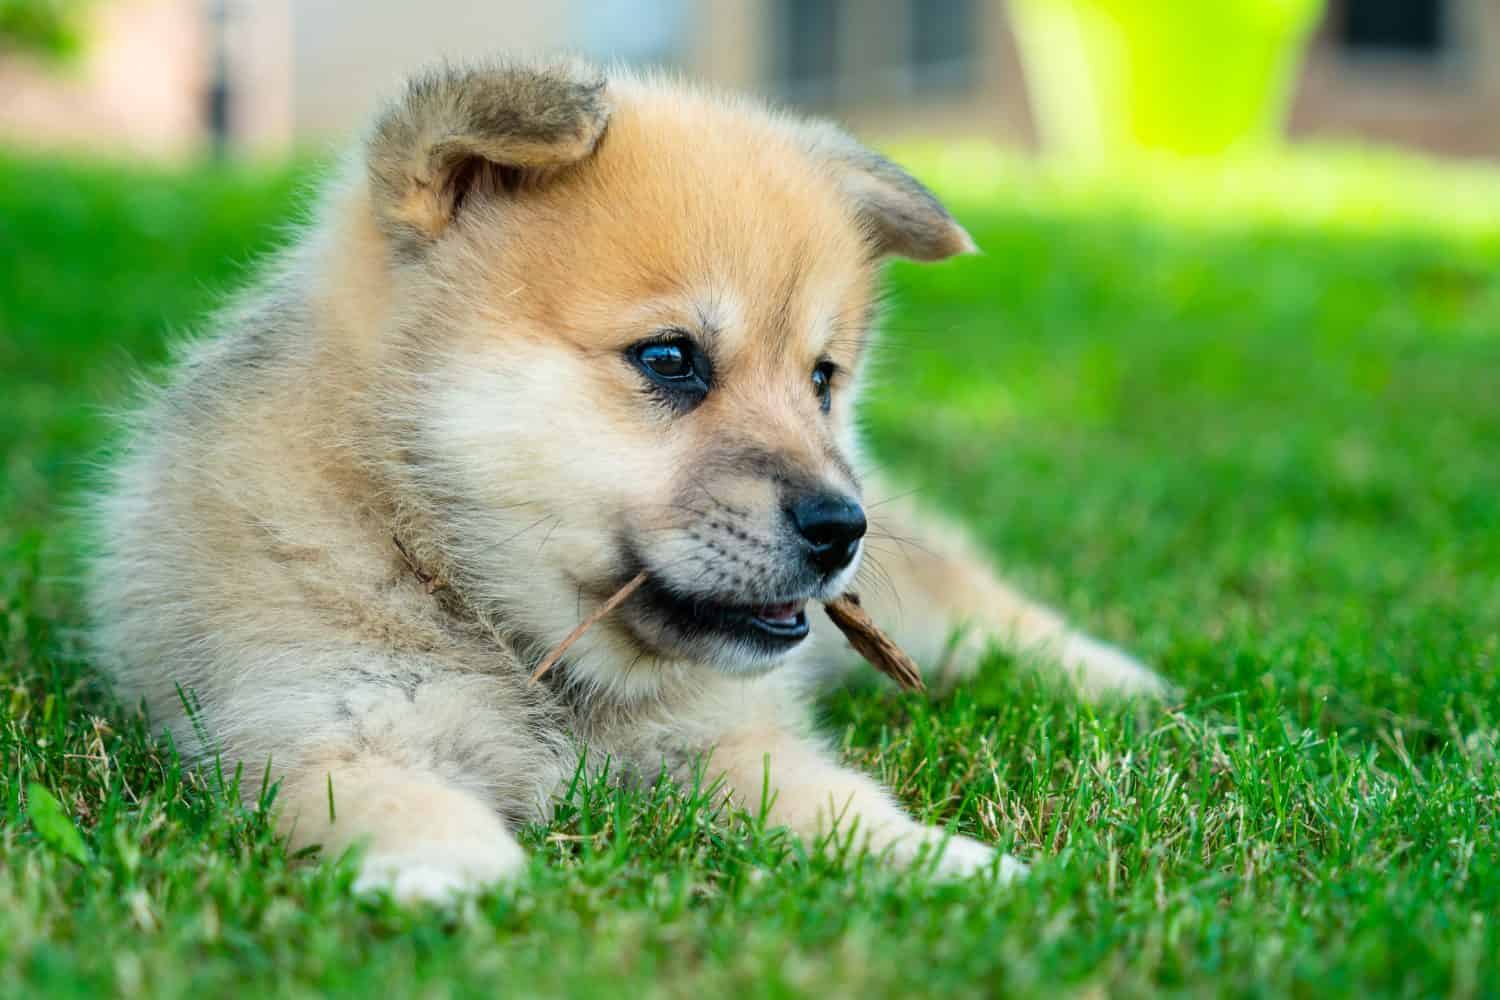 Puppy playing with stick in green grass during spring time , Adorable Cute Pomsky Puppy dog , a husky mixed with a Pomeranian